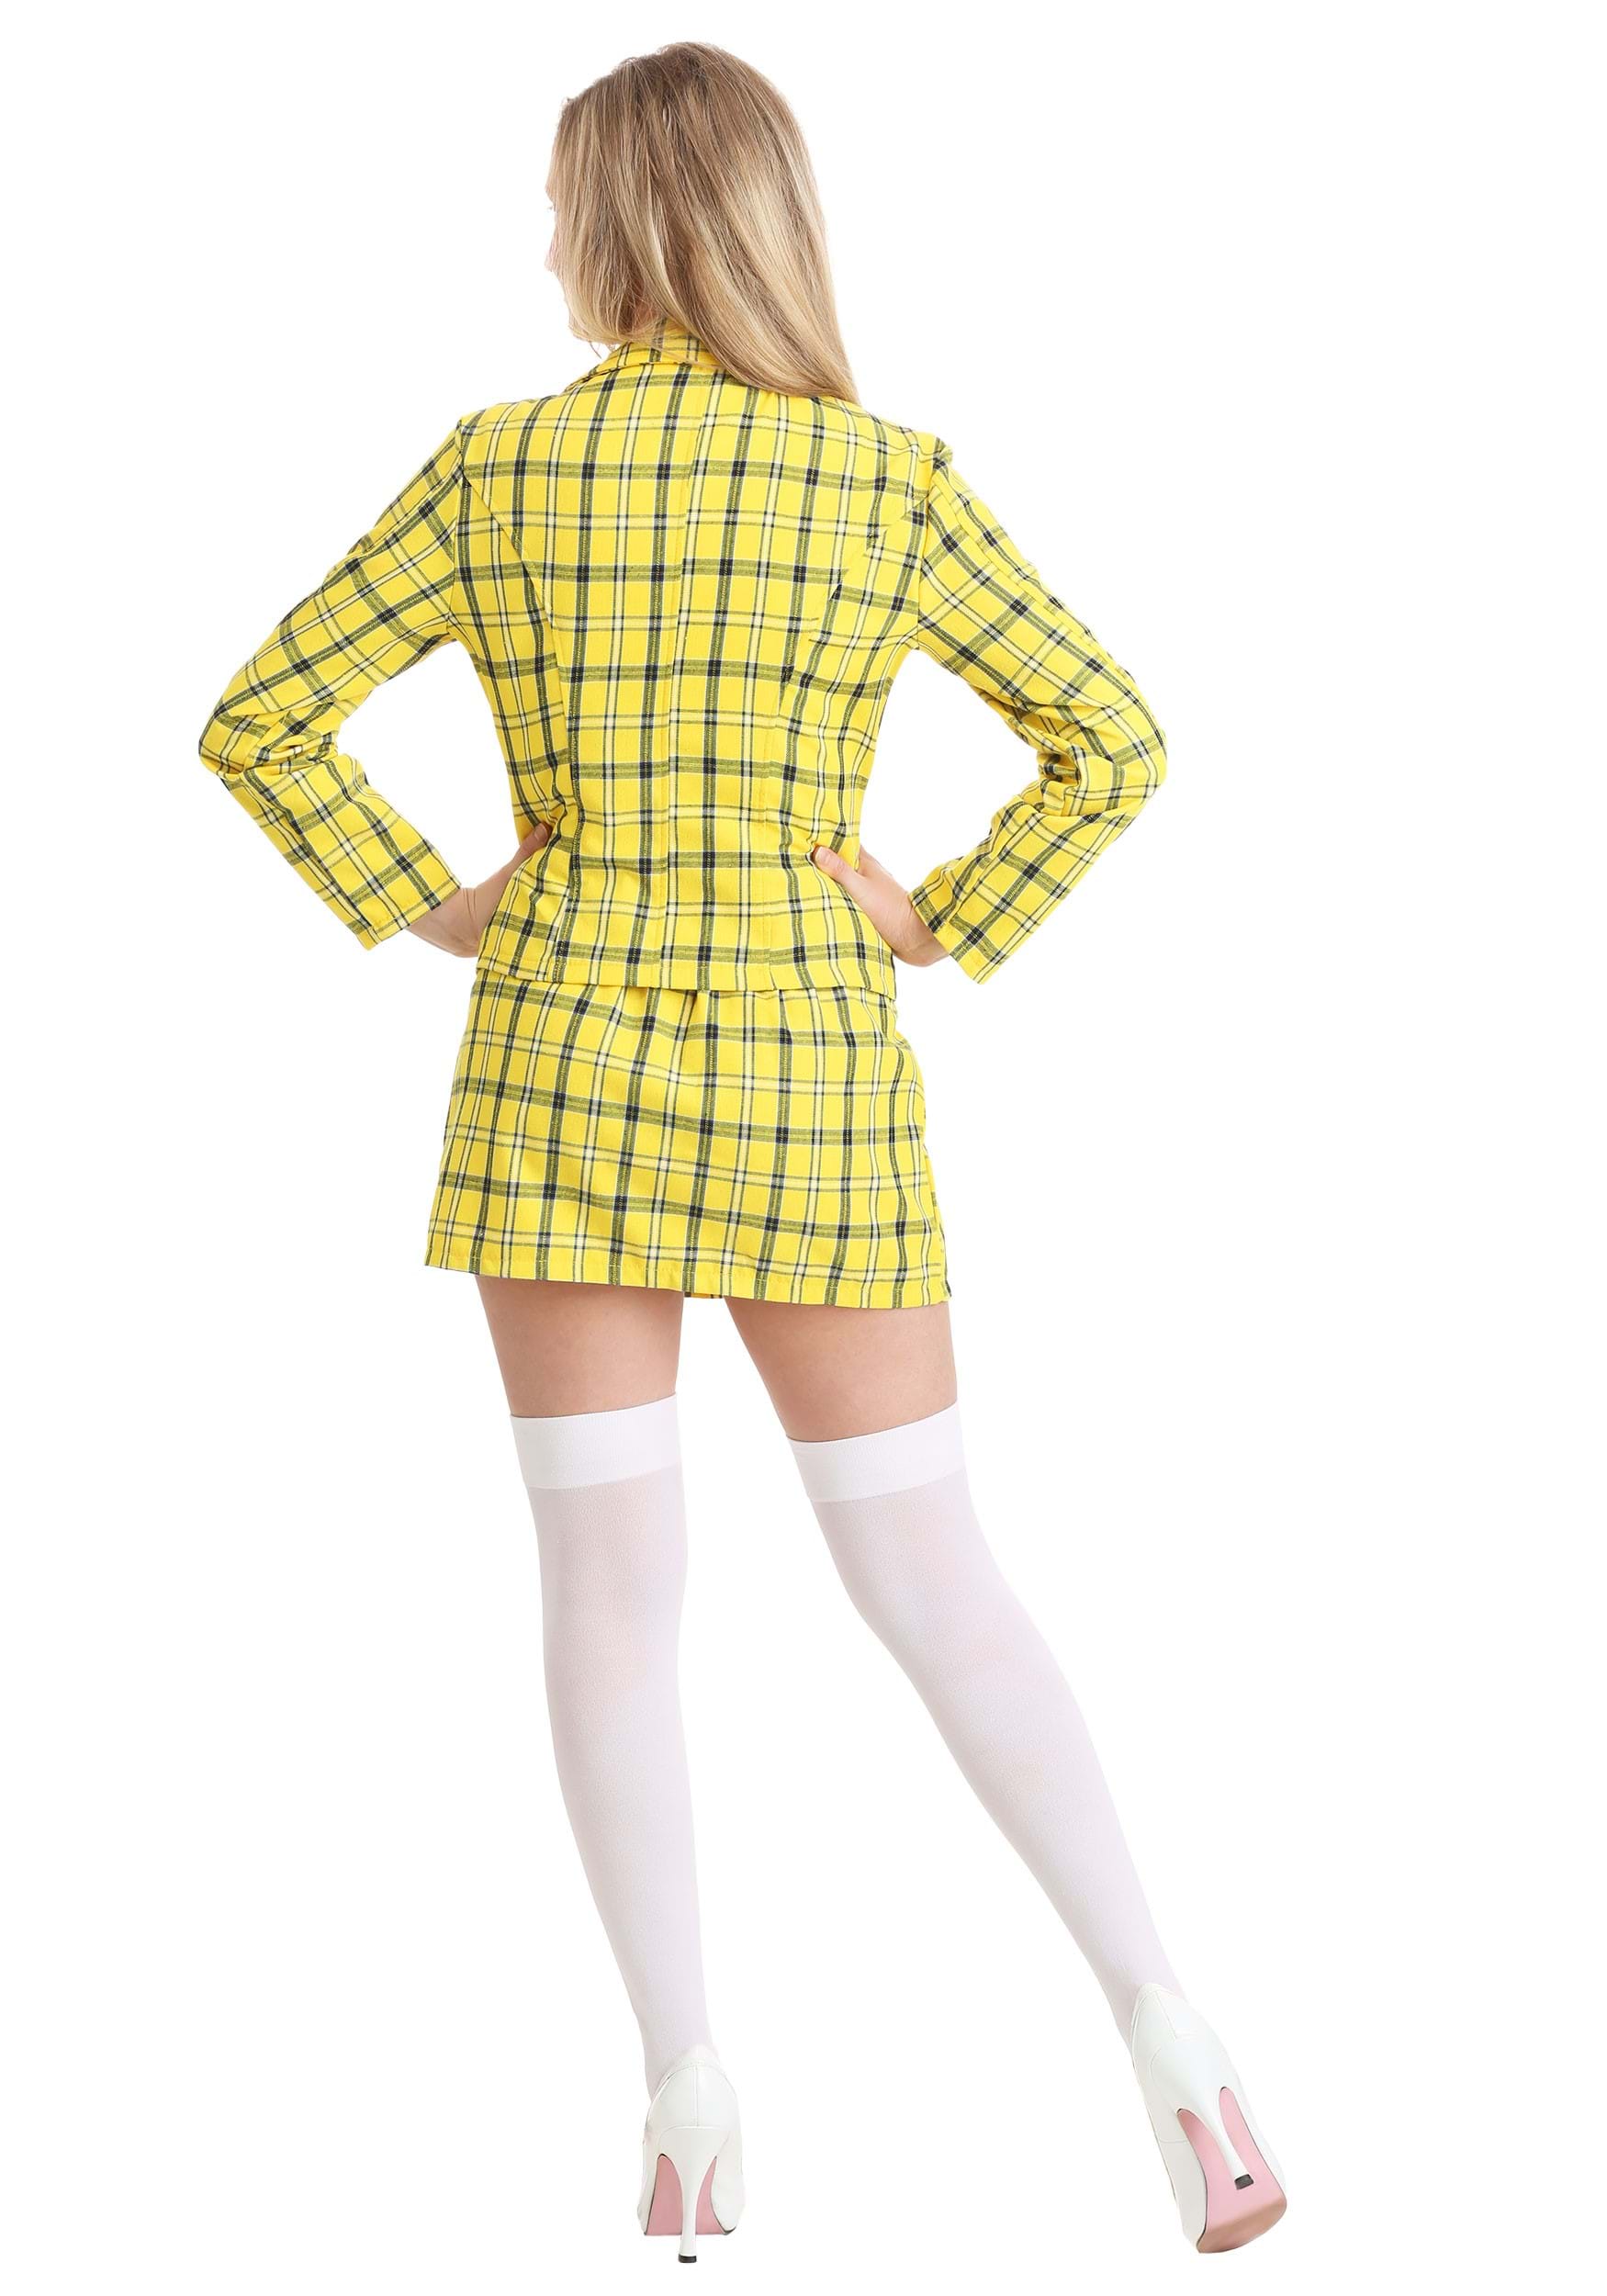 Clueless Cher Plus Size Costume For Women , 90s Movie Costume